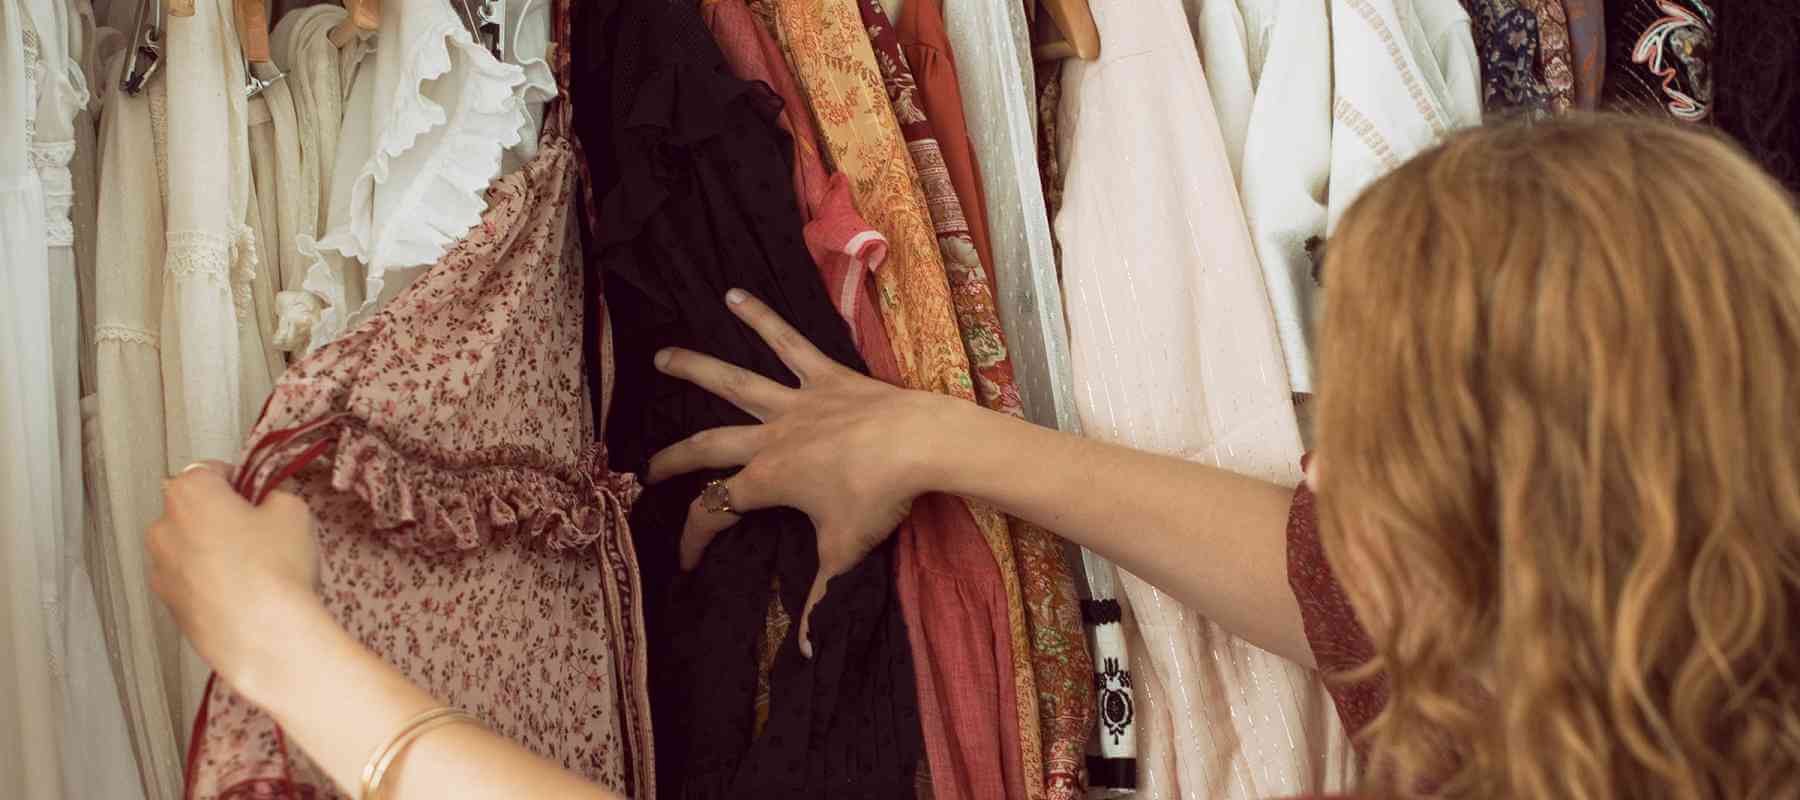 Renting Your Wardrobe for Extra Cash